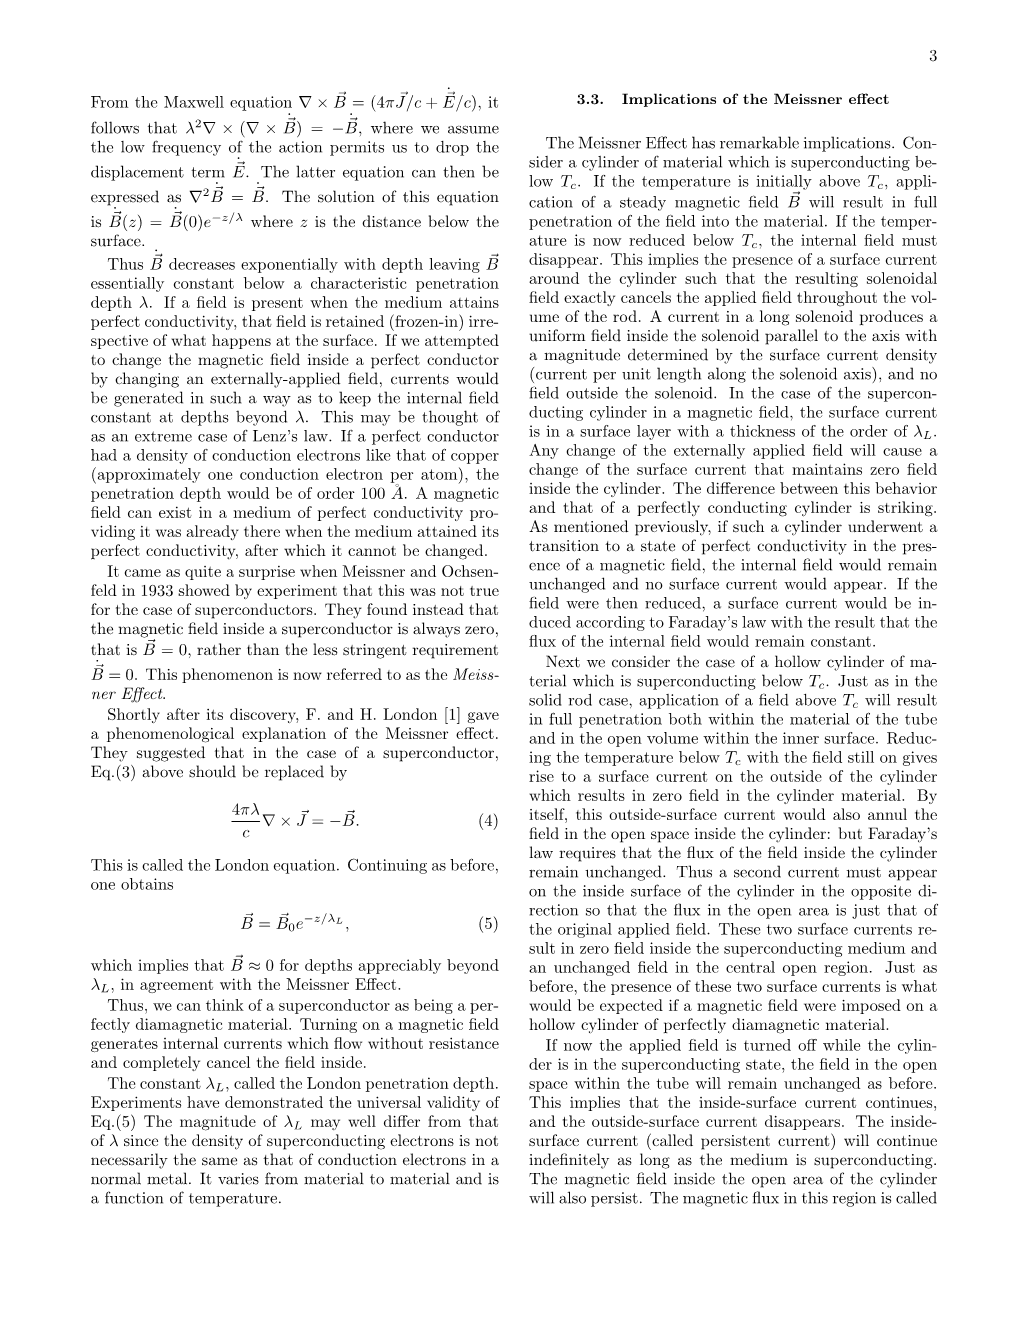 Superconductivity: the Meissner Effect, Persistent Currents and the Josephson Effects